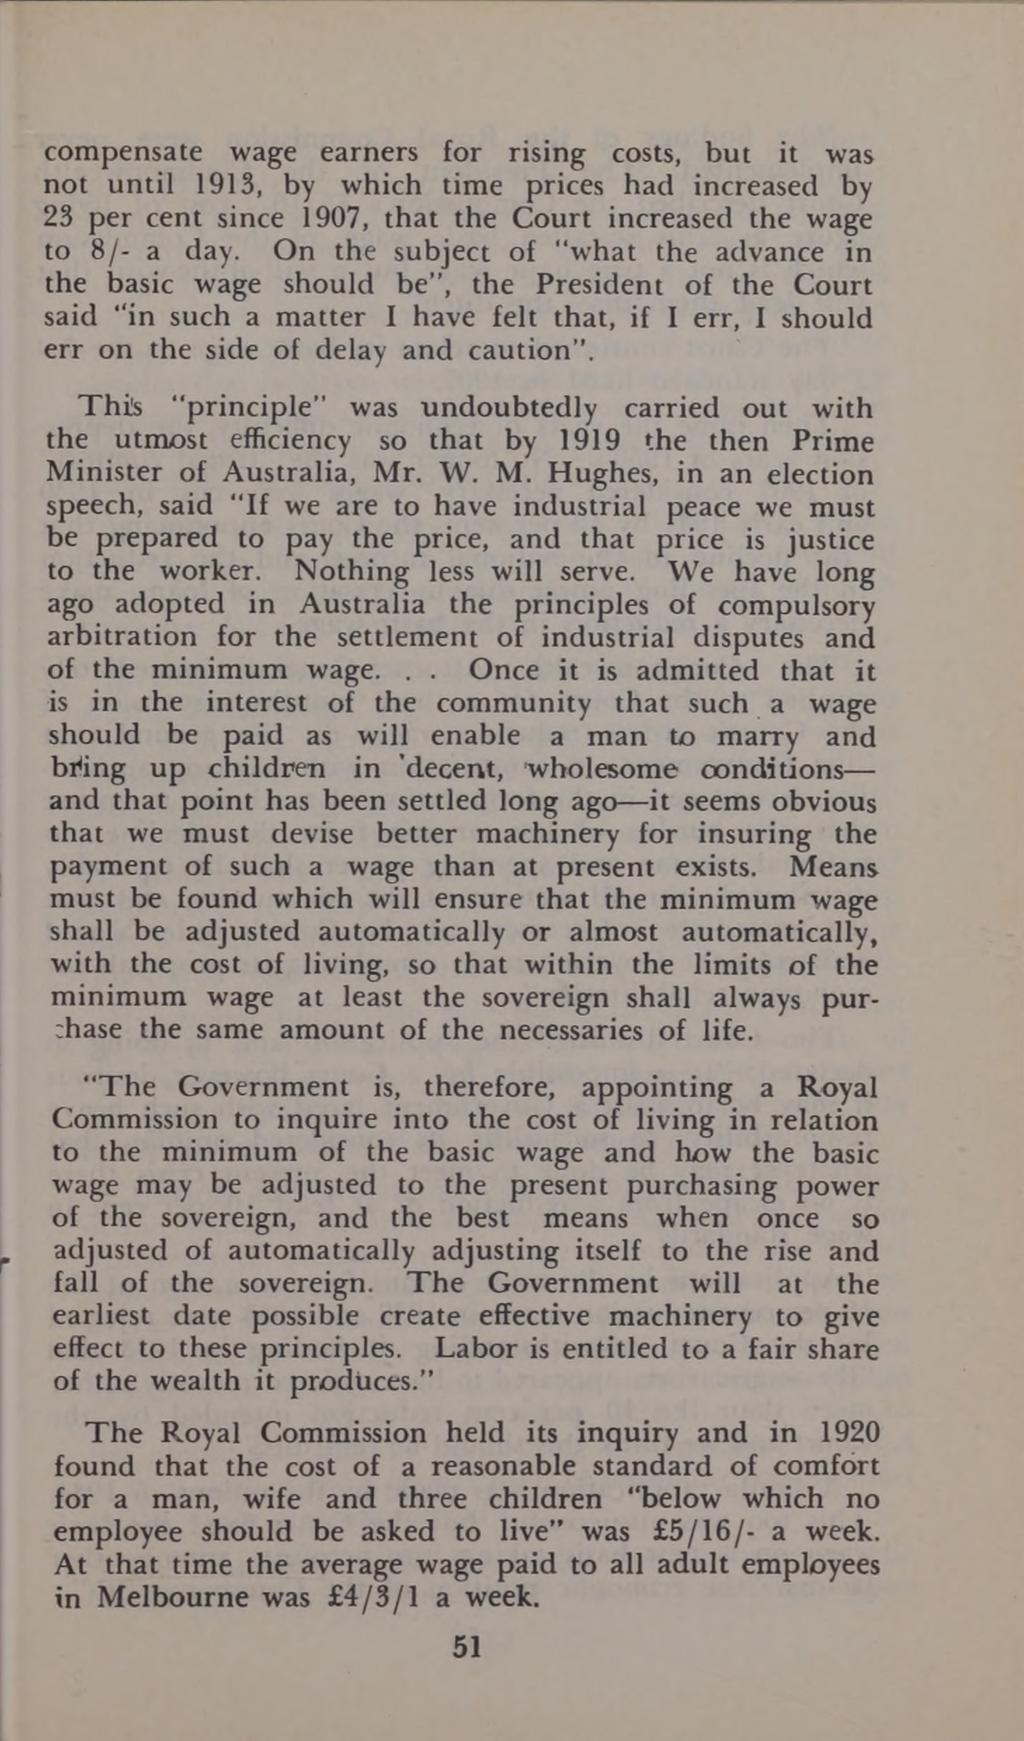 compensate wage earners for rising costs, but it was not until 1913, by which time prices had increased by 23 per cent since 1907, that the Court increased the wage to 8/- a day.